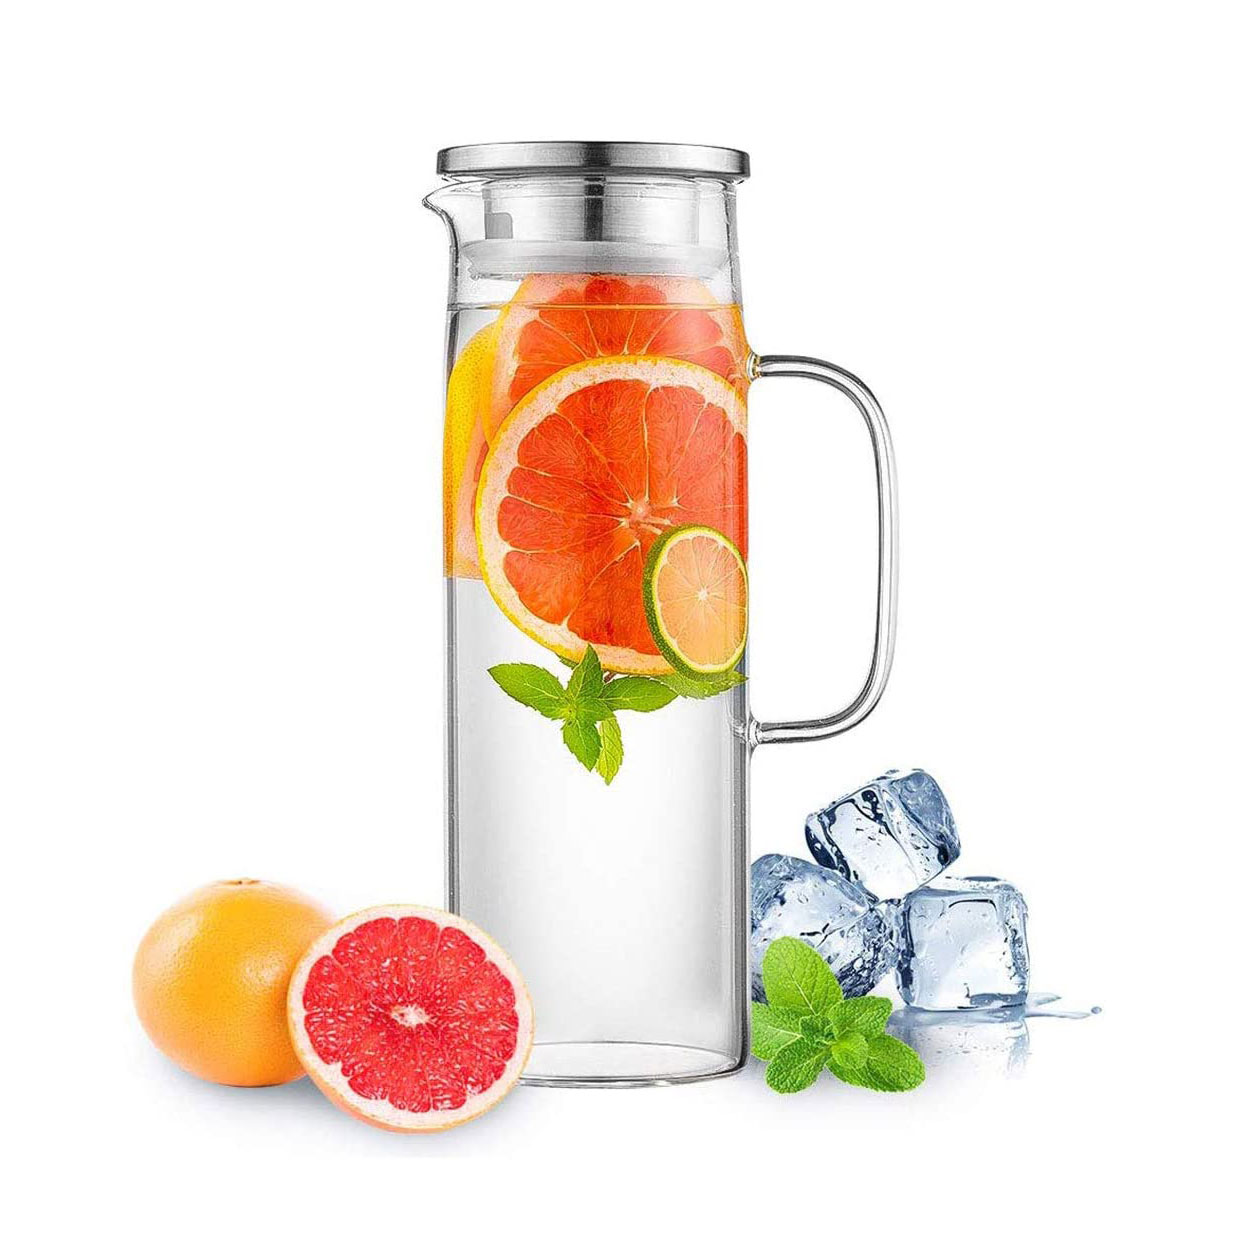  Auxmeware - Heat Resistant Glass Pitcher With Lid And Spout,  Glass Iced Tea Pitchers Beverage Pitchers For Fridge, Glass Water Pitcher  And Carafe 1200ml/41oz : Home & Kitchen